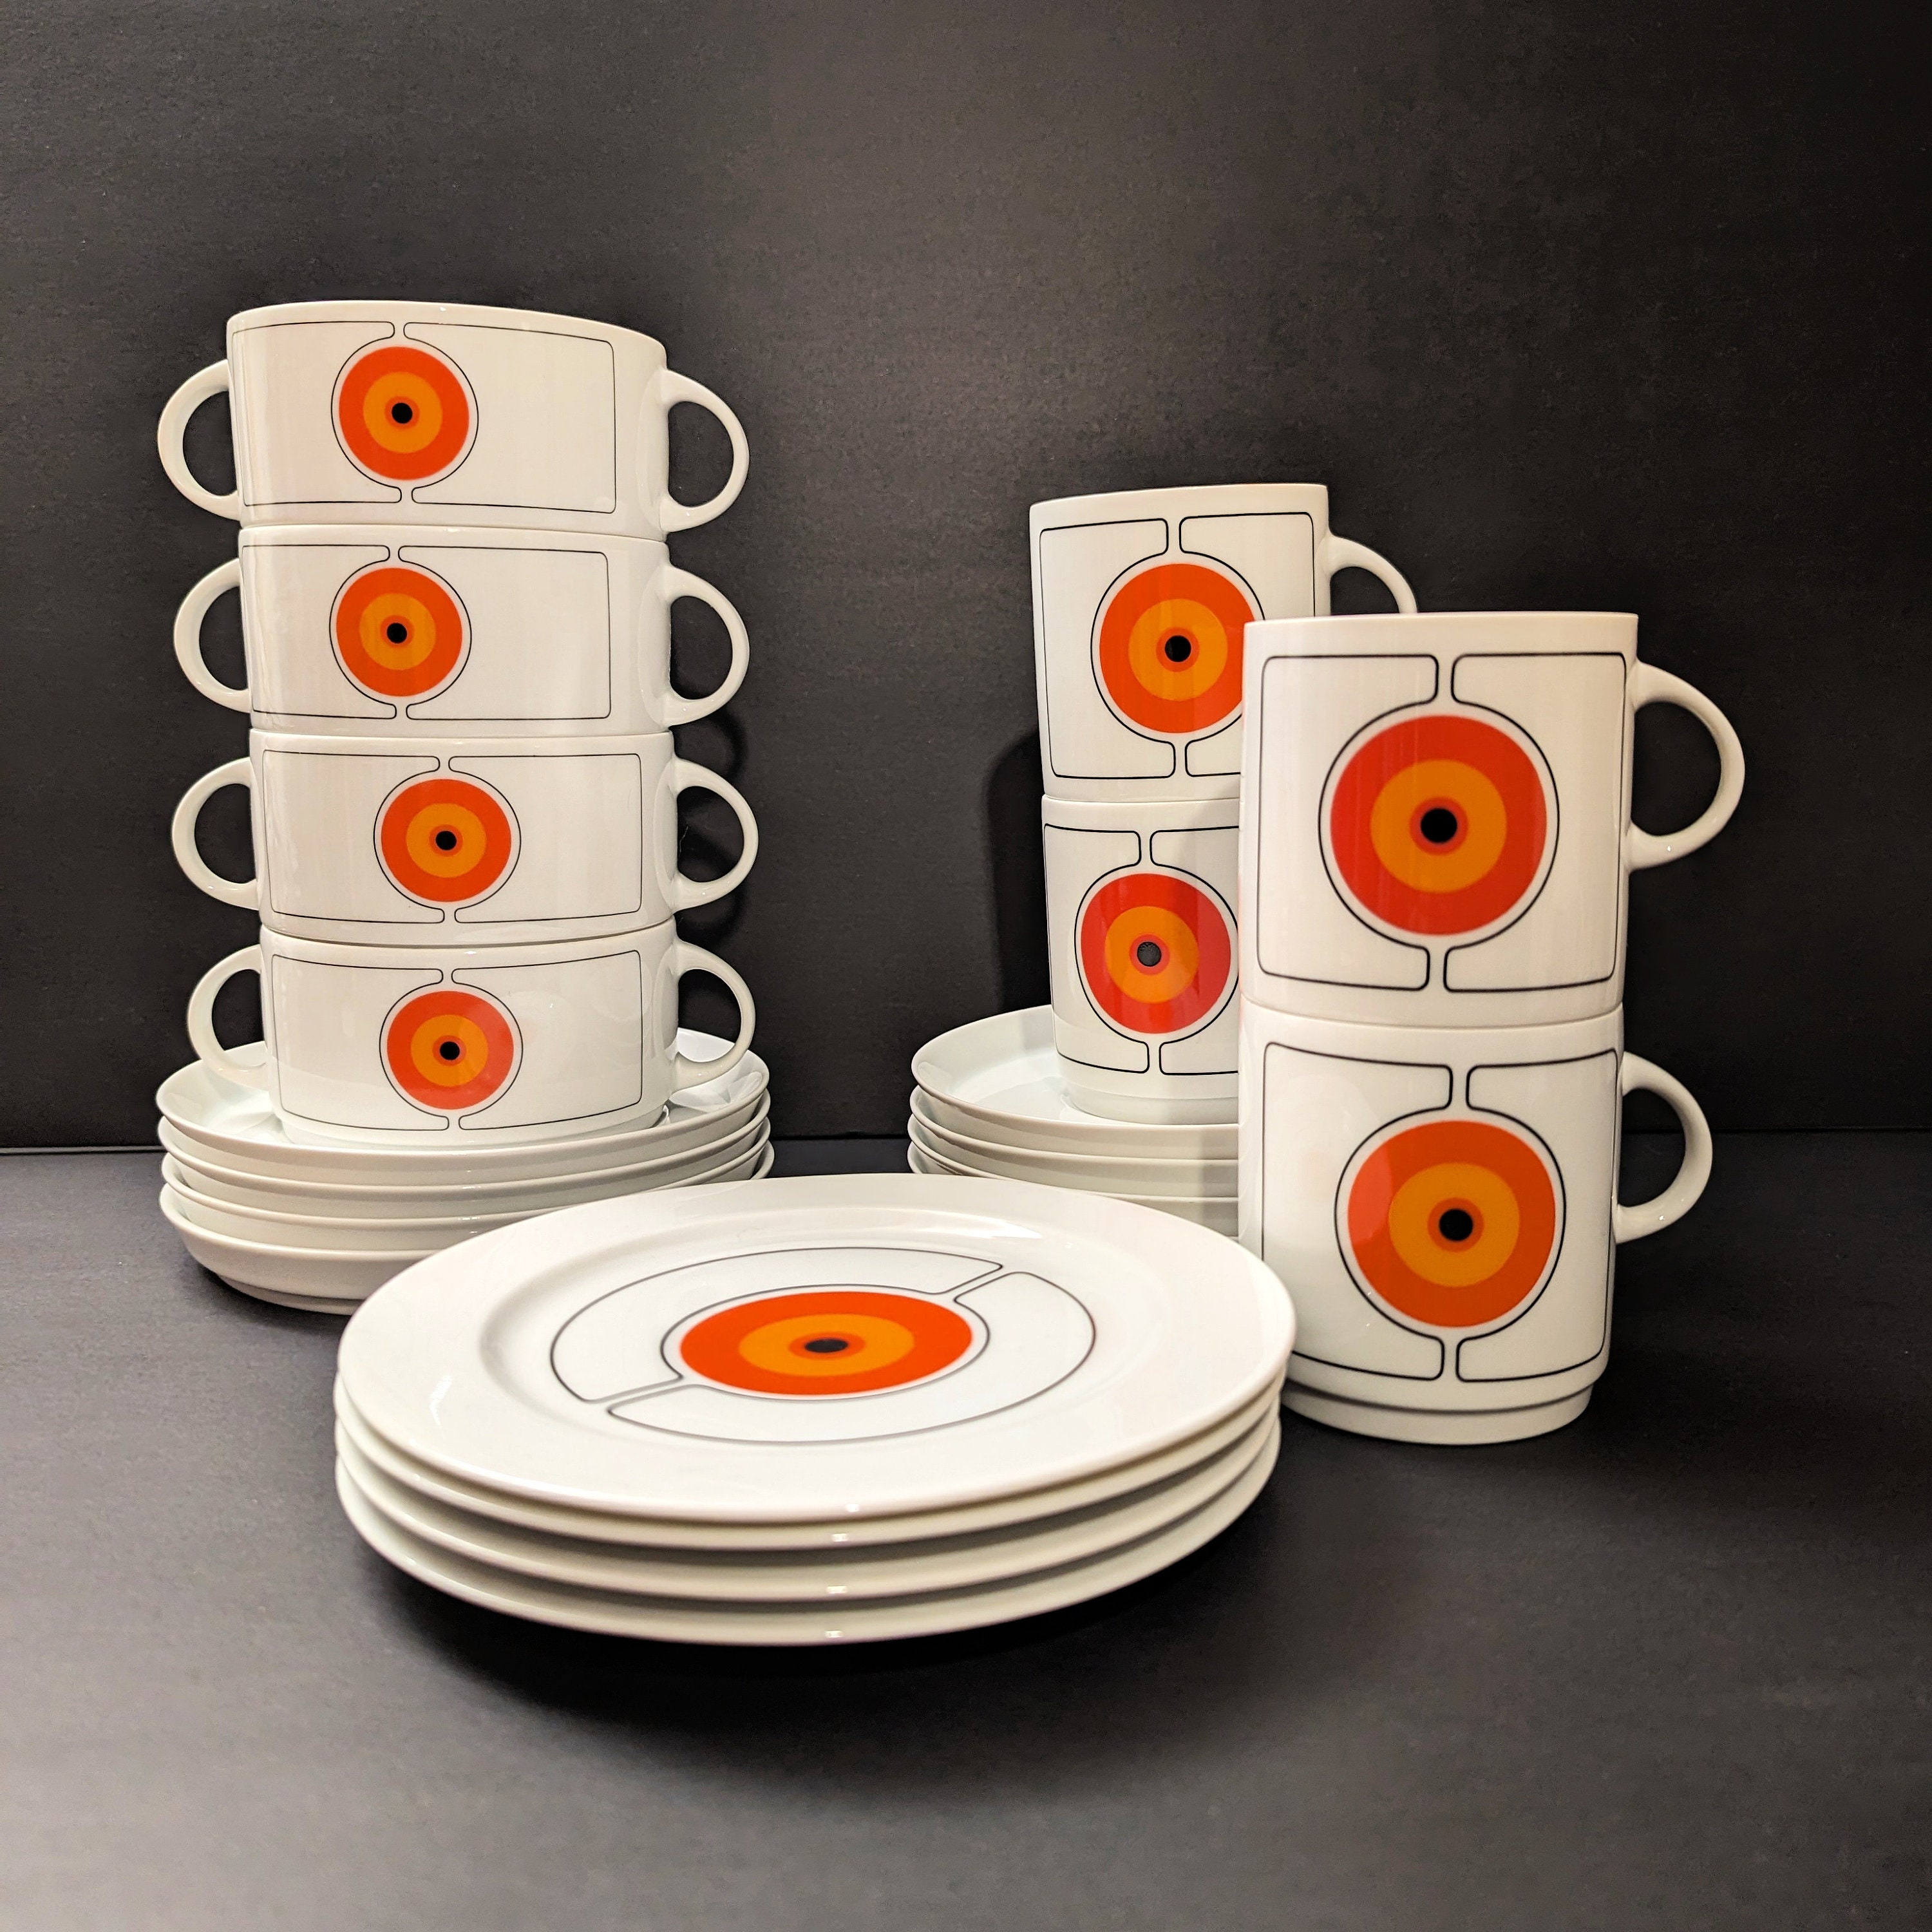 Espresso Cup & Saucer by Thomas Keller Collection for Raynaud